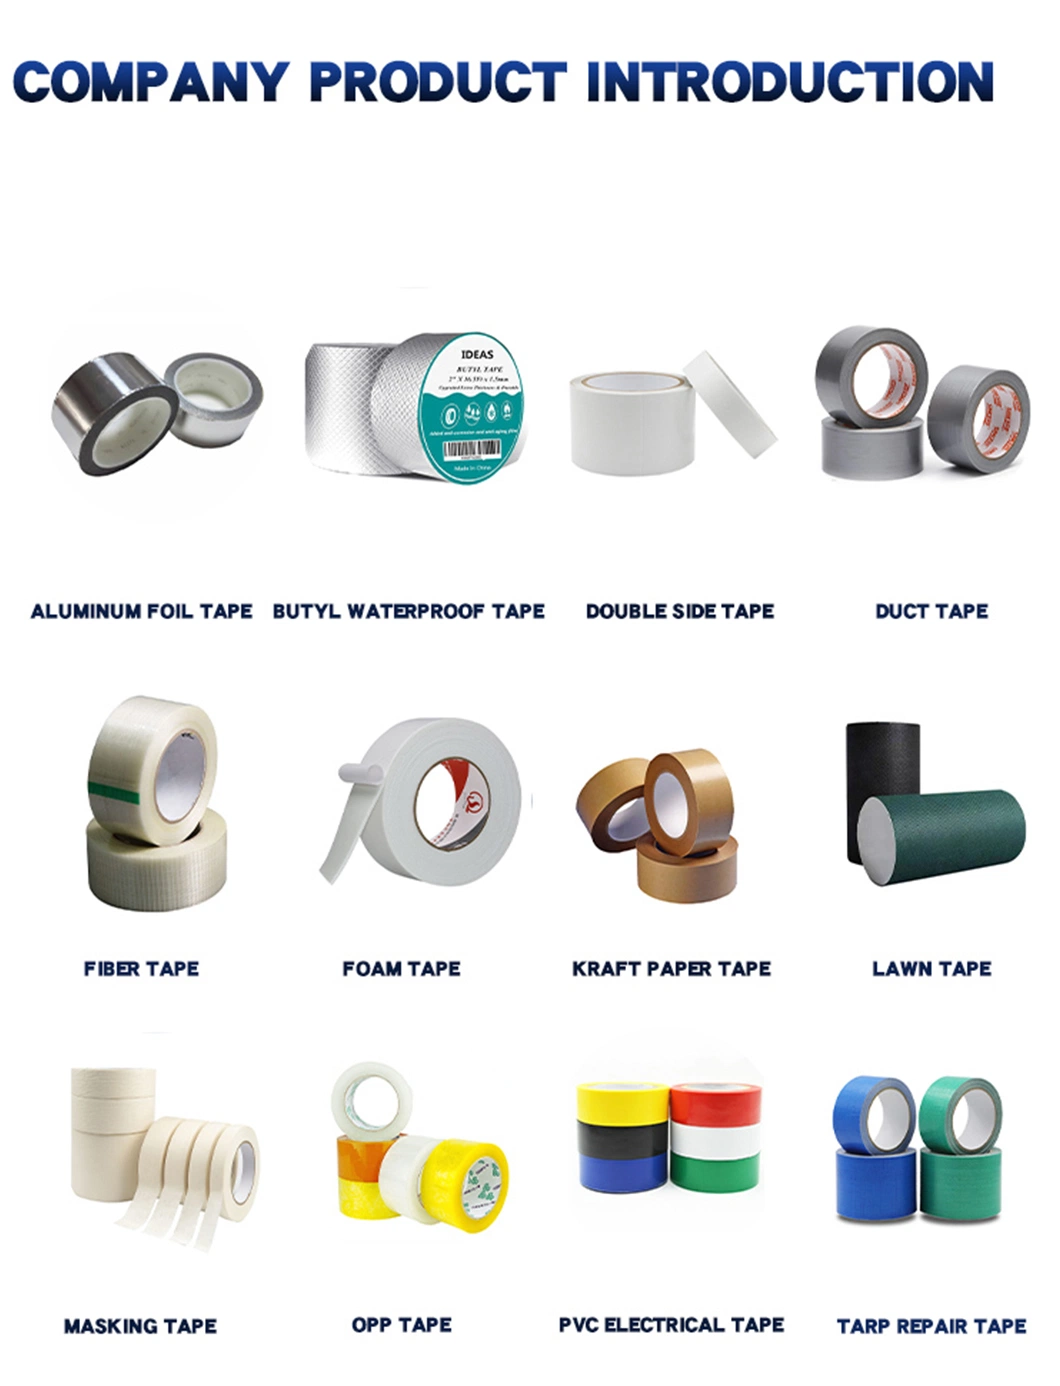 Double Sided Strong Adhesive Fiberglass Reinforced Filament Strapping Removable Multi-Purpose Rug Tape for Strip Sealing